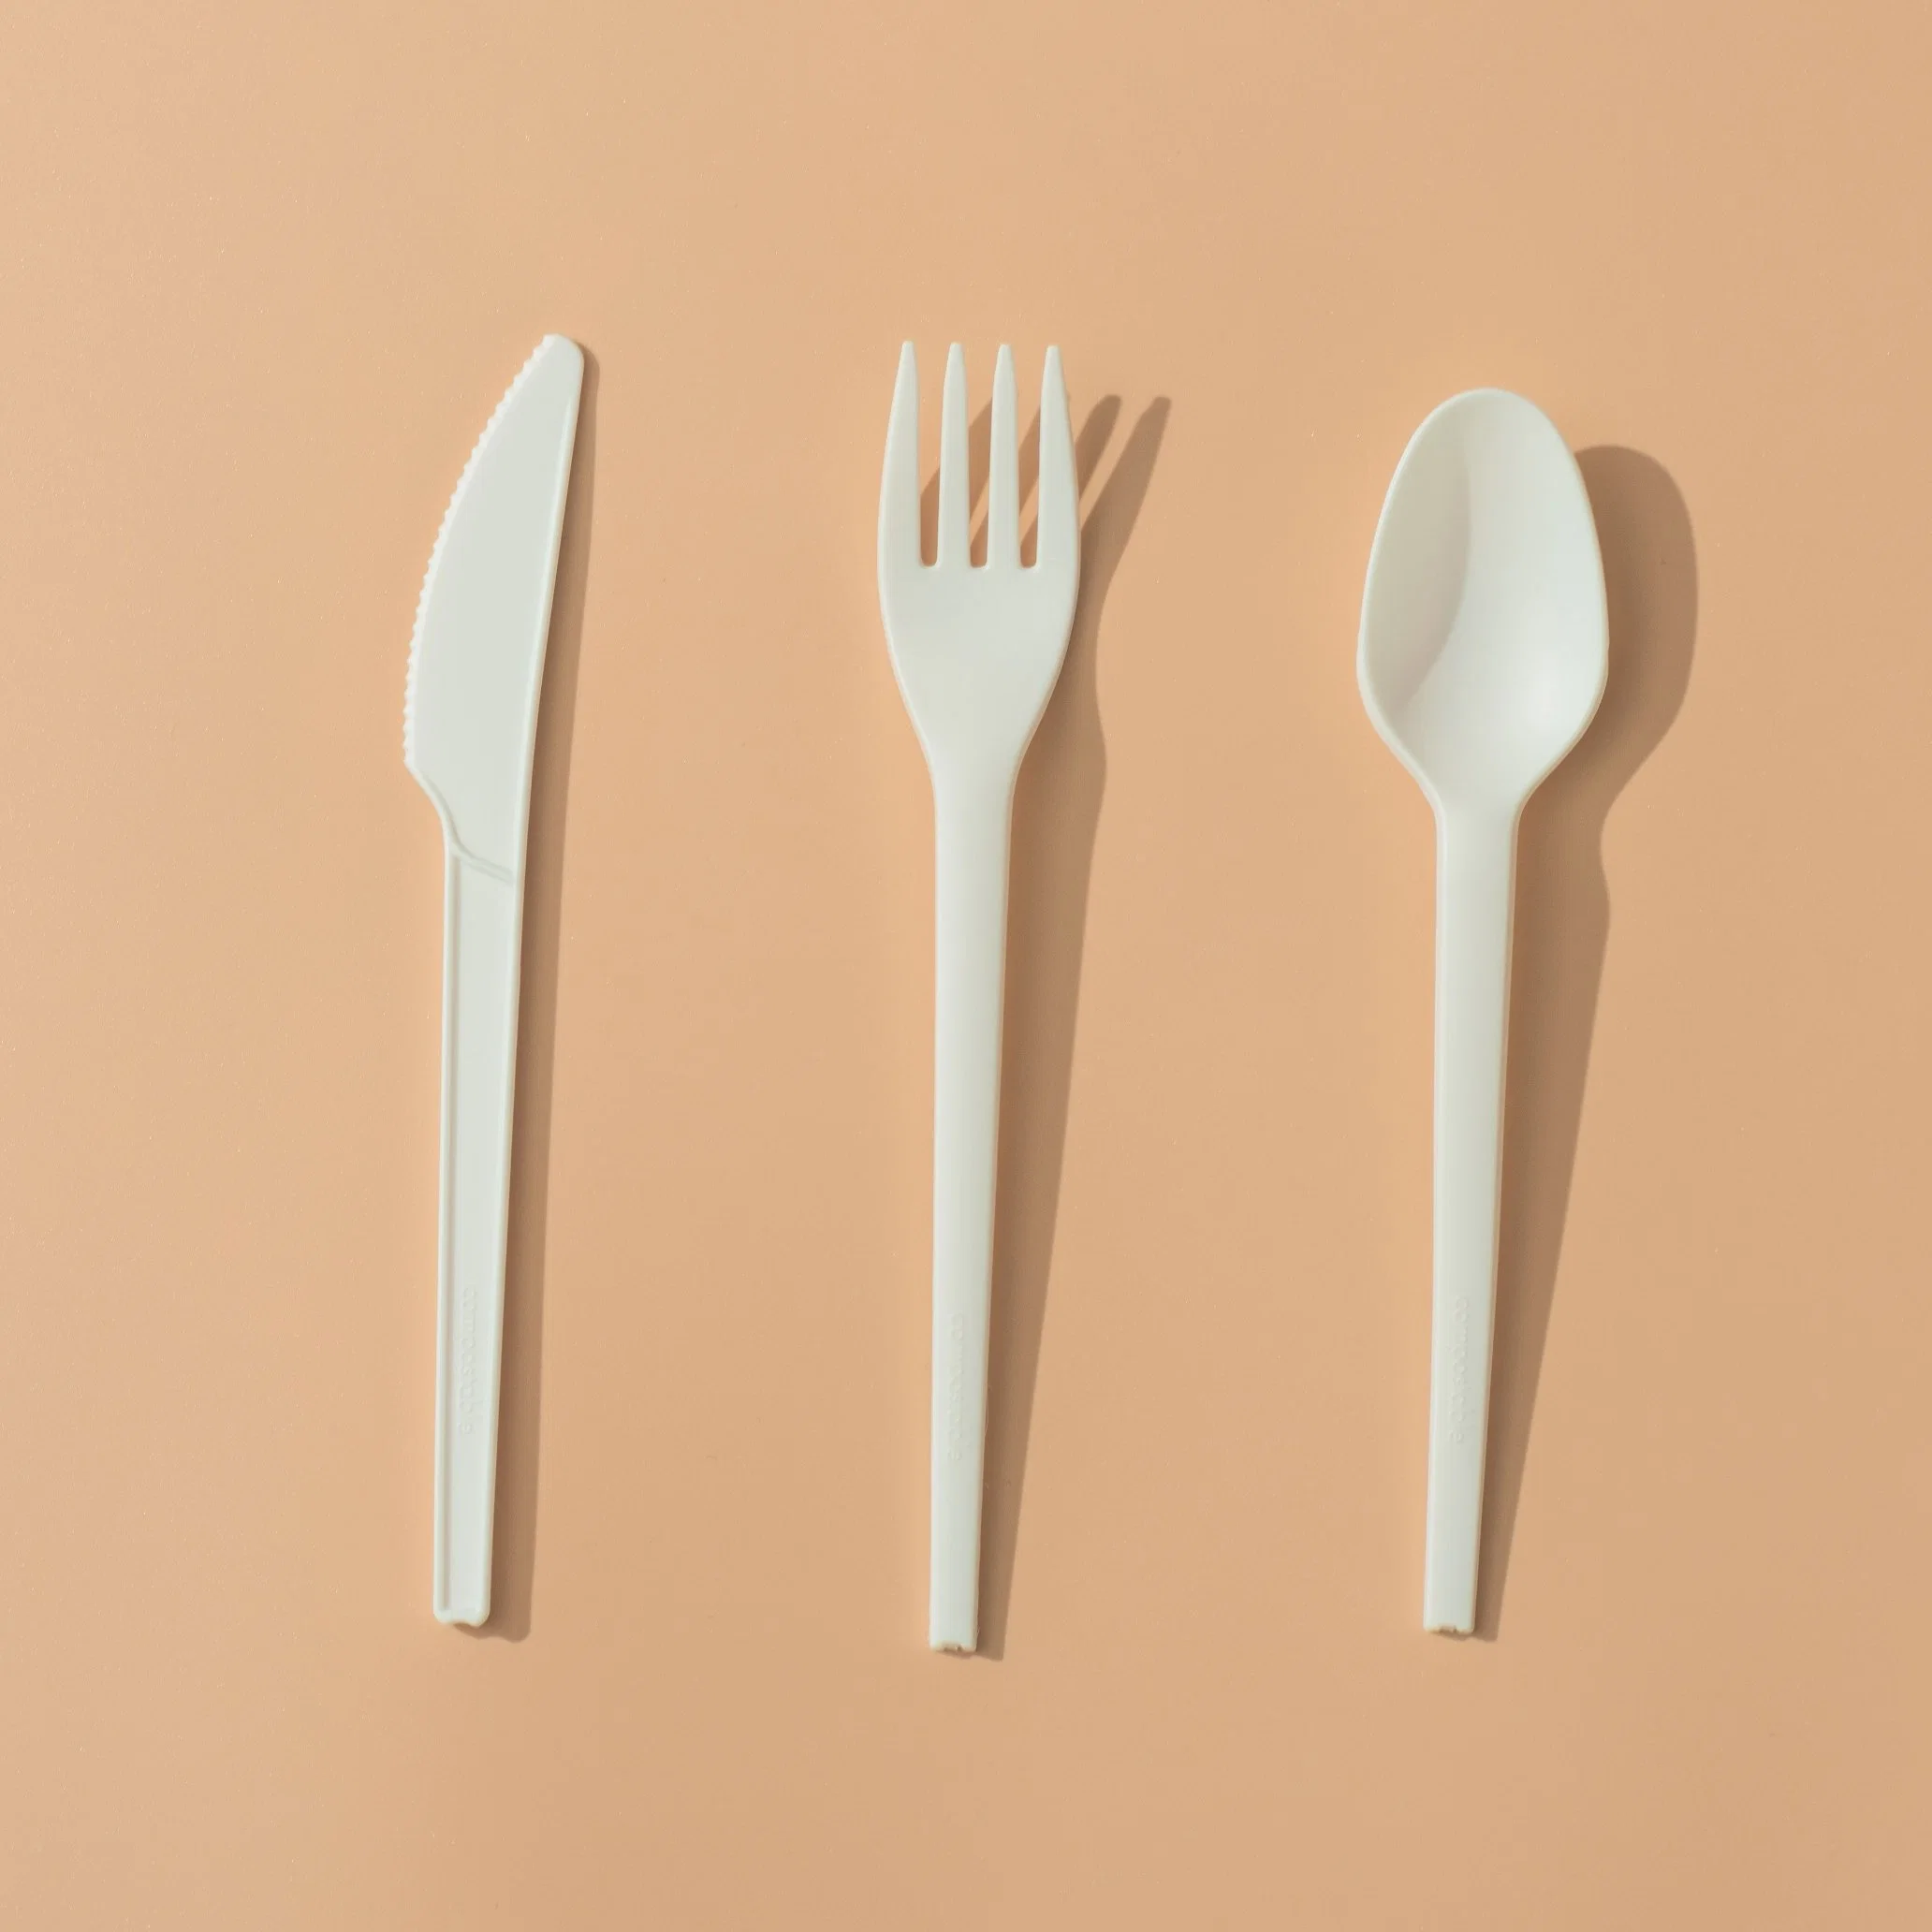 PLA Disposable Cutlery, 100% Biodegradable and Compostable